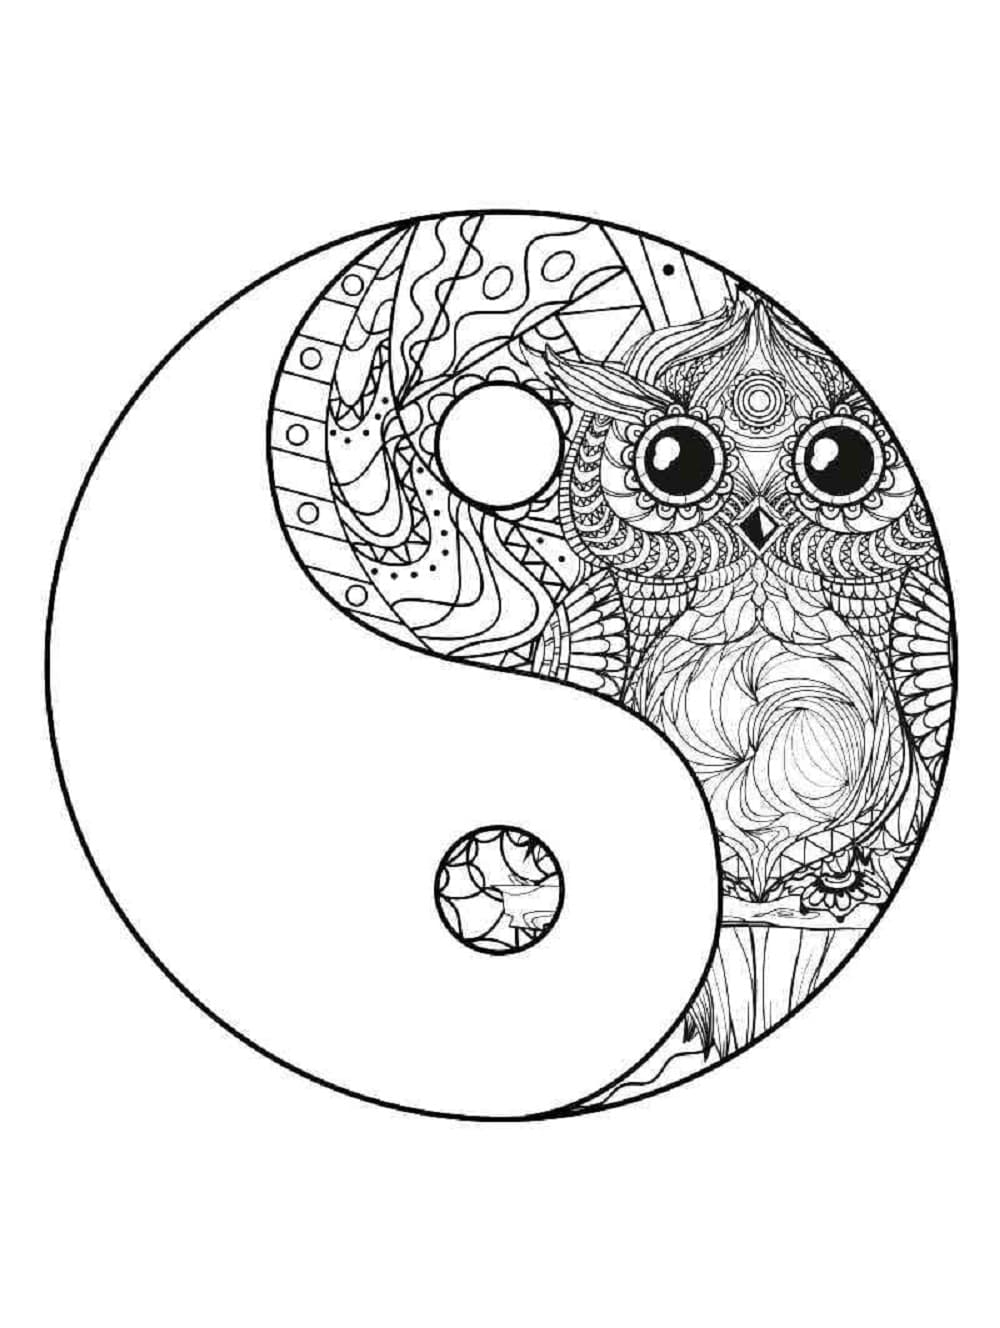 Printable Yin Yang with Owl Coloring Page